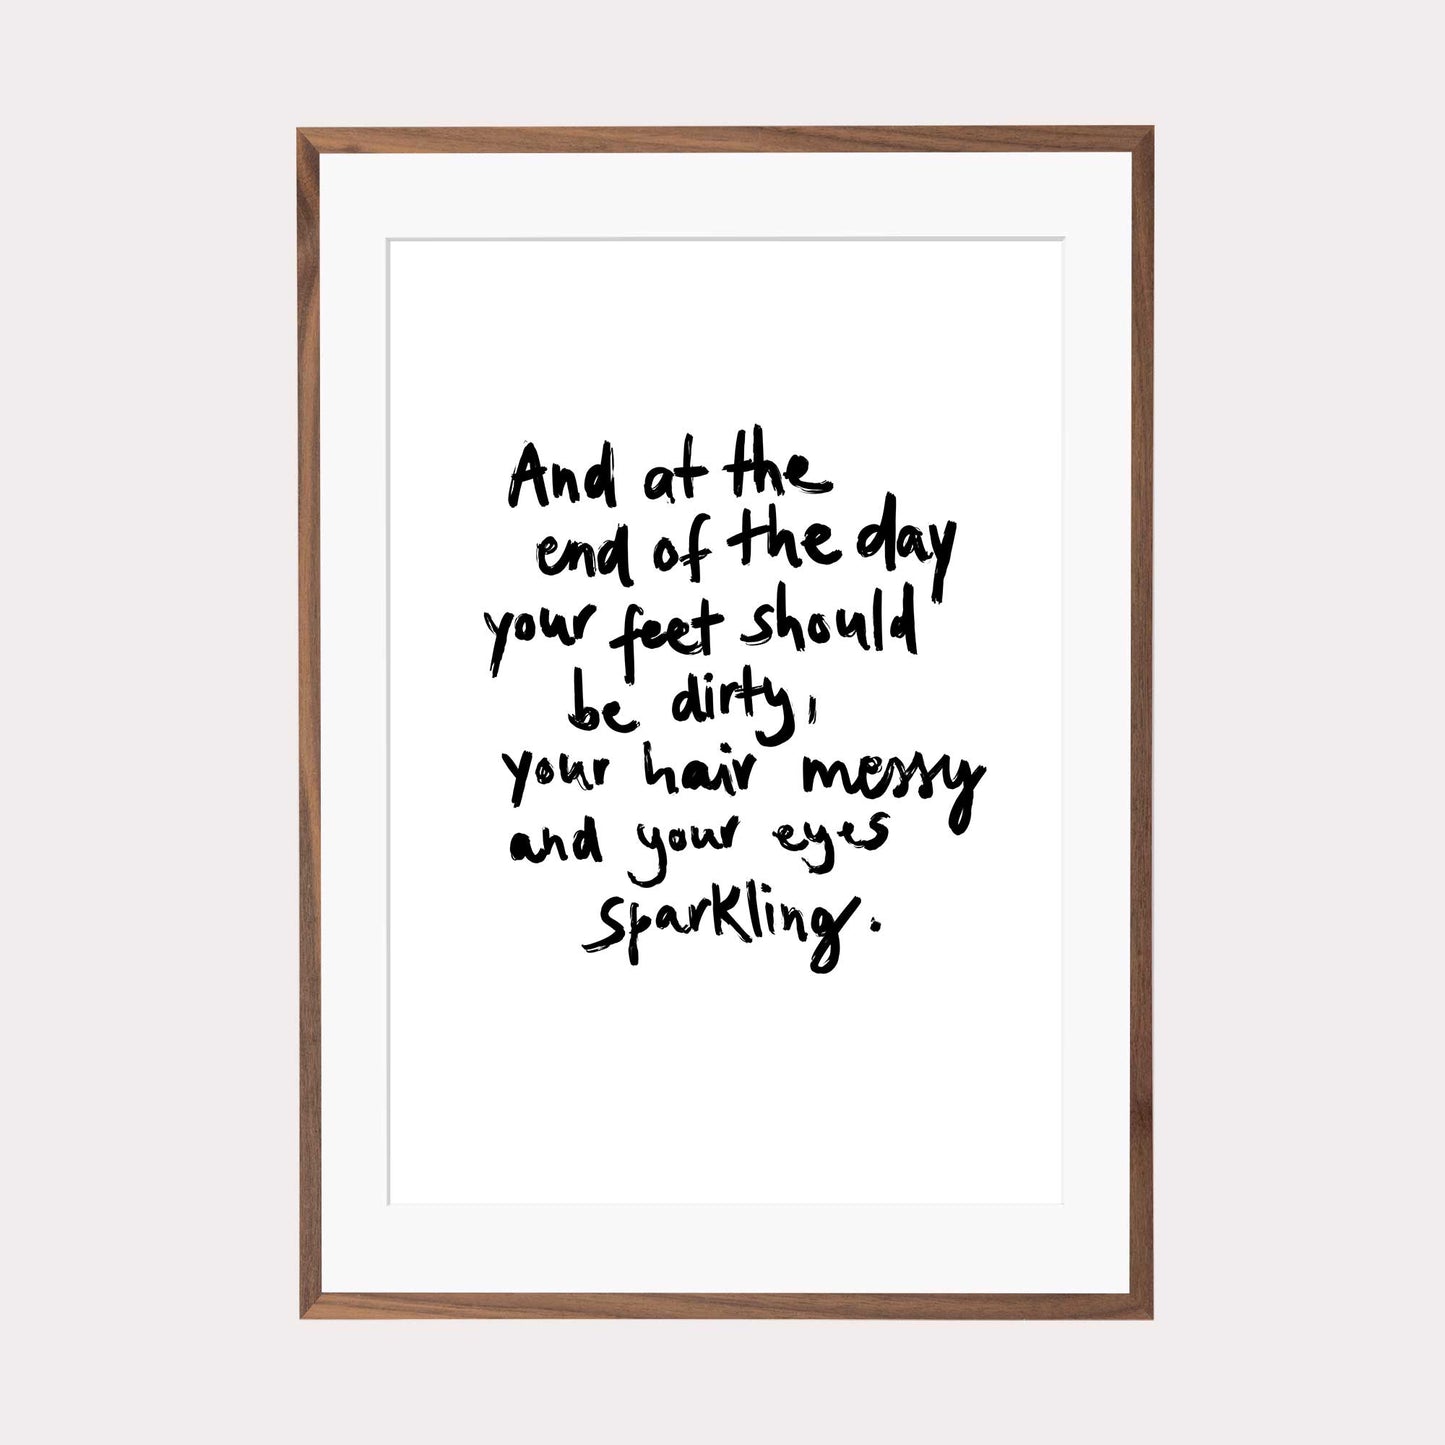 Art Print | At the end of the day